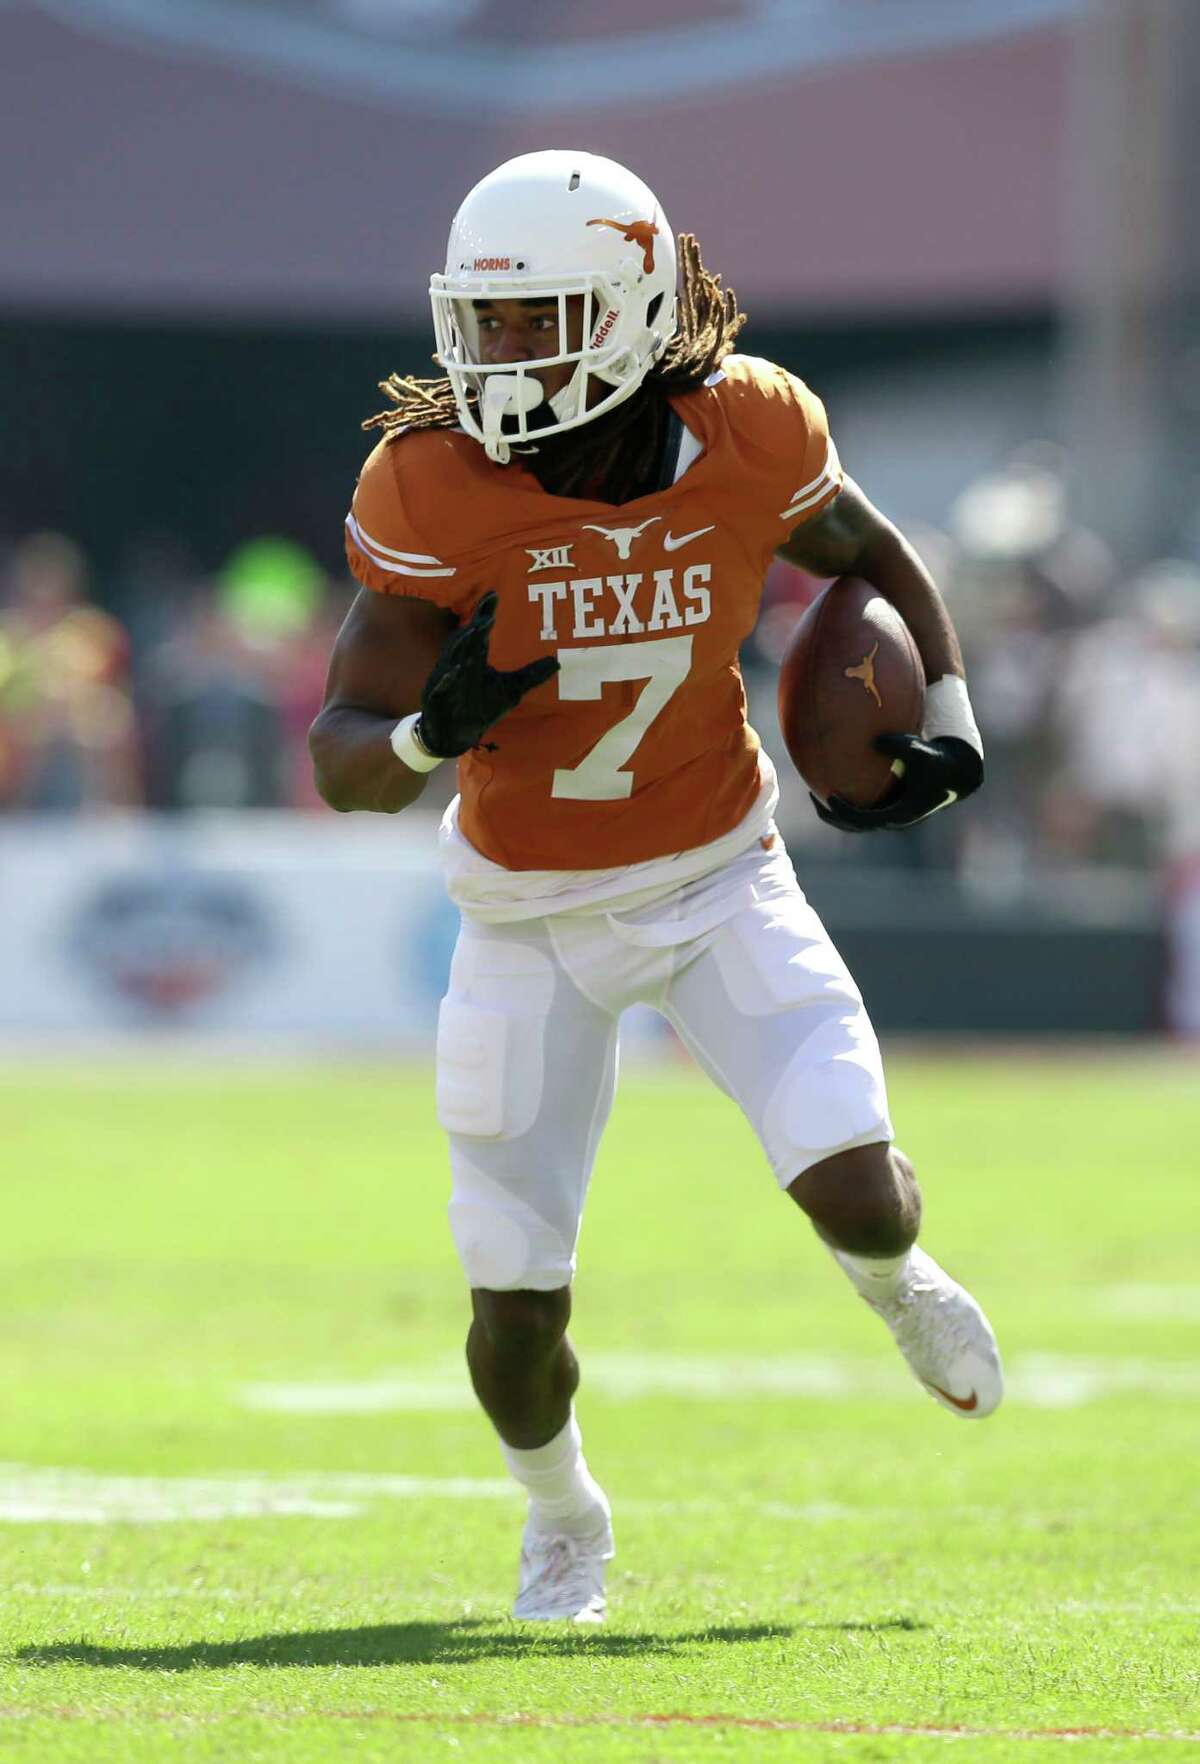 Texas wide receiver Marcus Johnson (7) looks for running room in an NCAA college football game against Oklahoma Saturday, Oct. 10, 2015, in Dallas. (AP Photo/LM Otero)